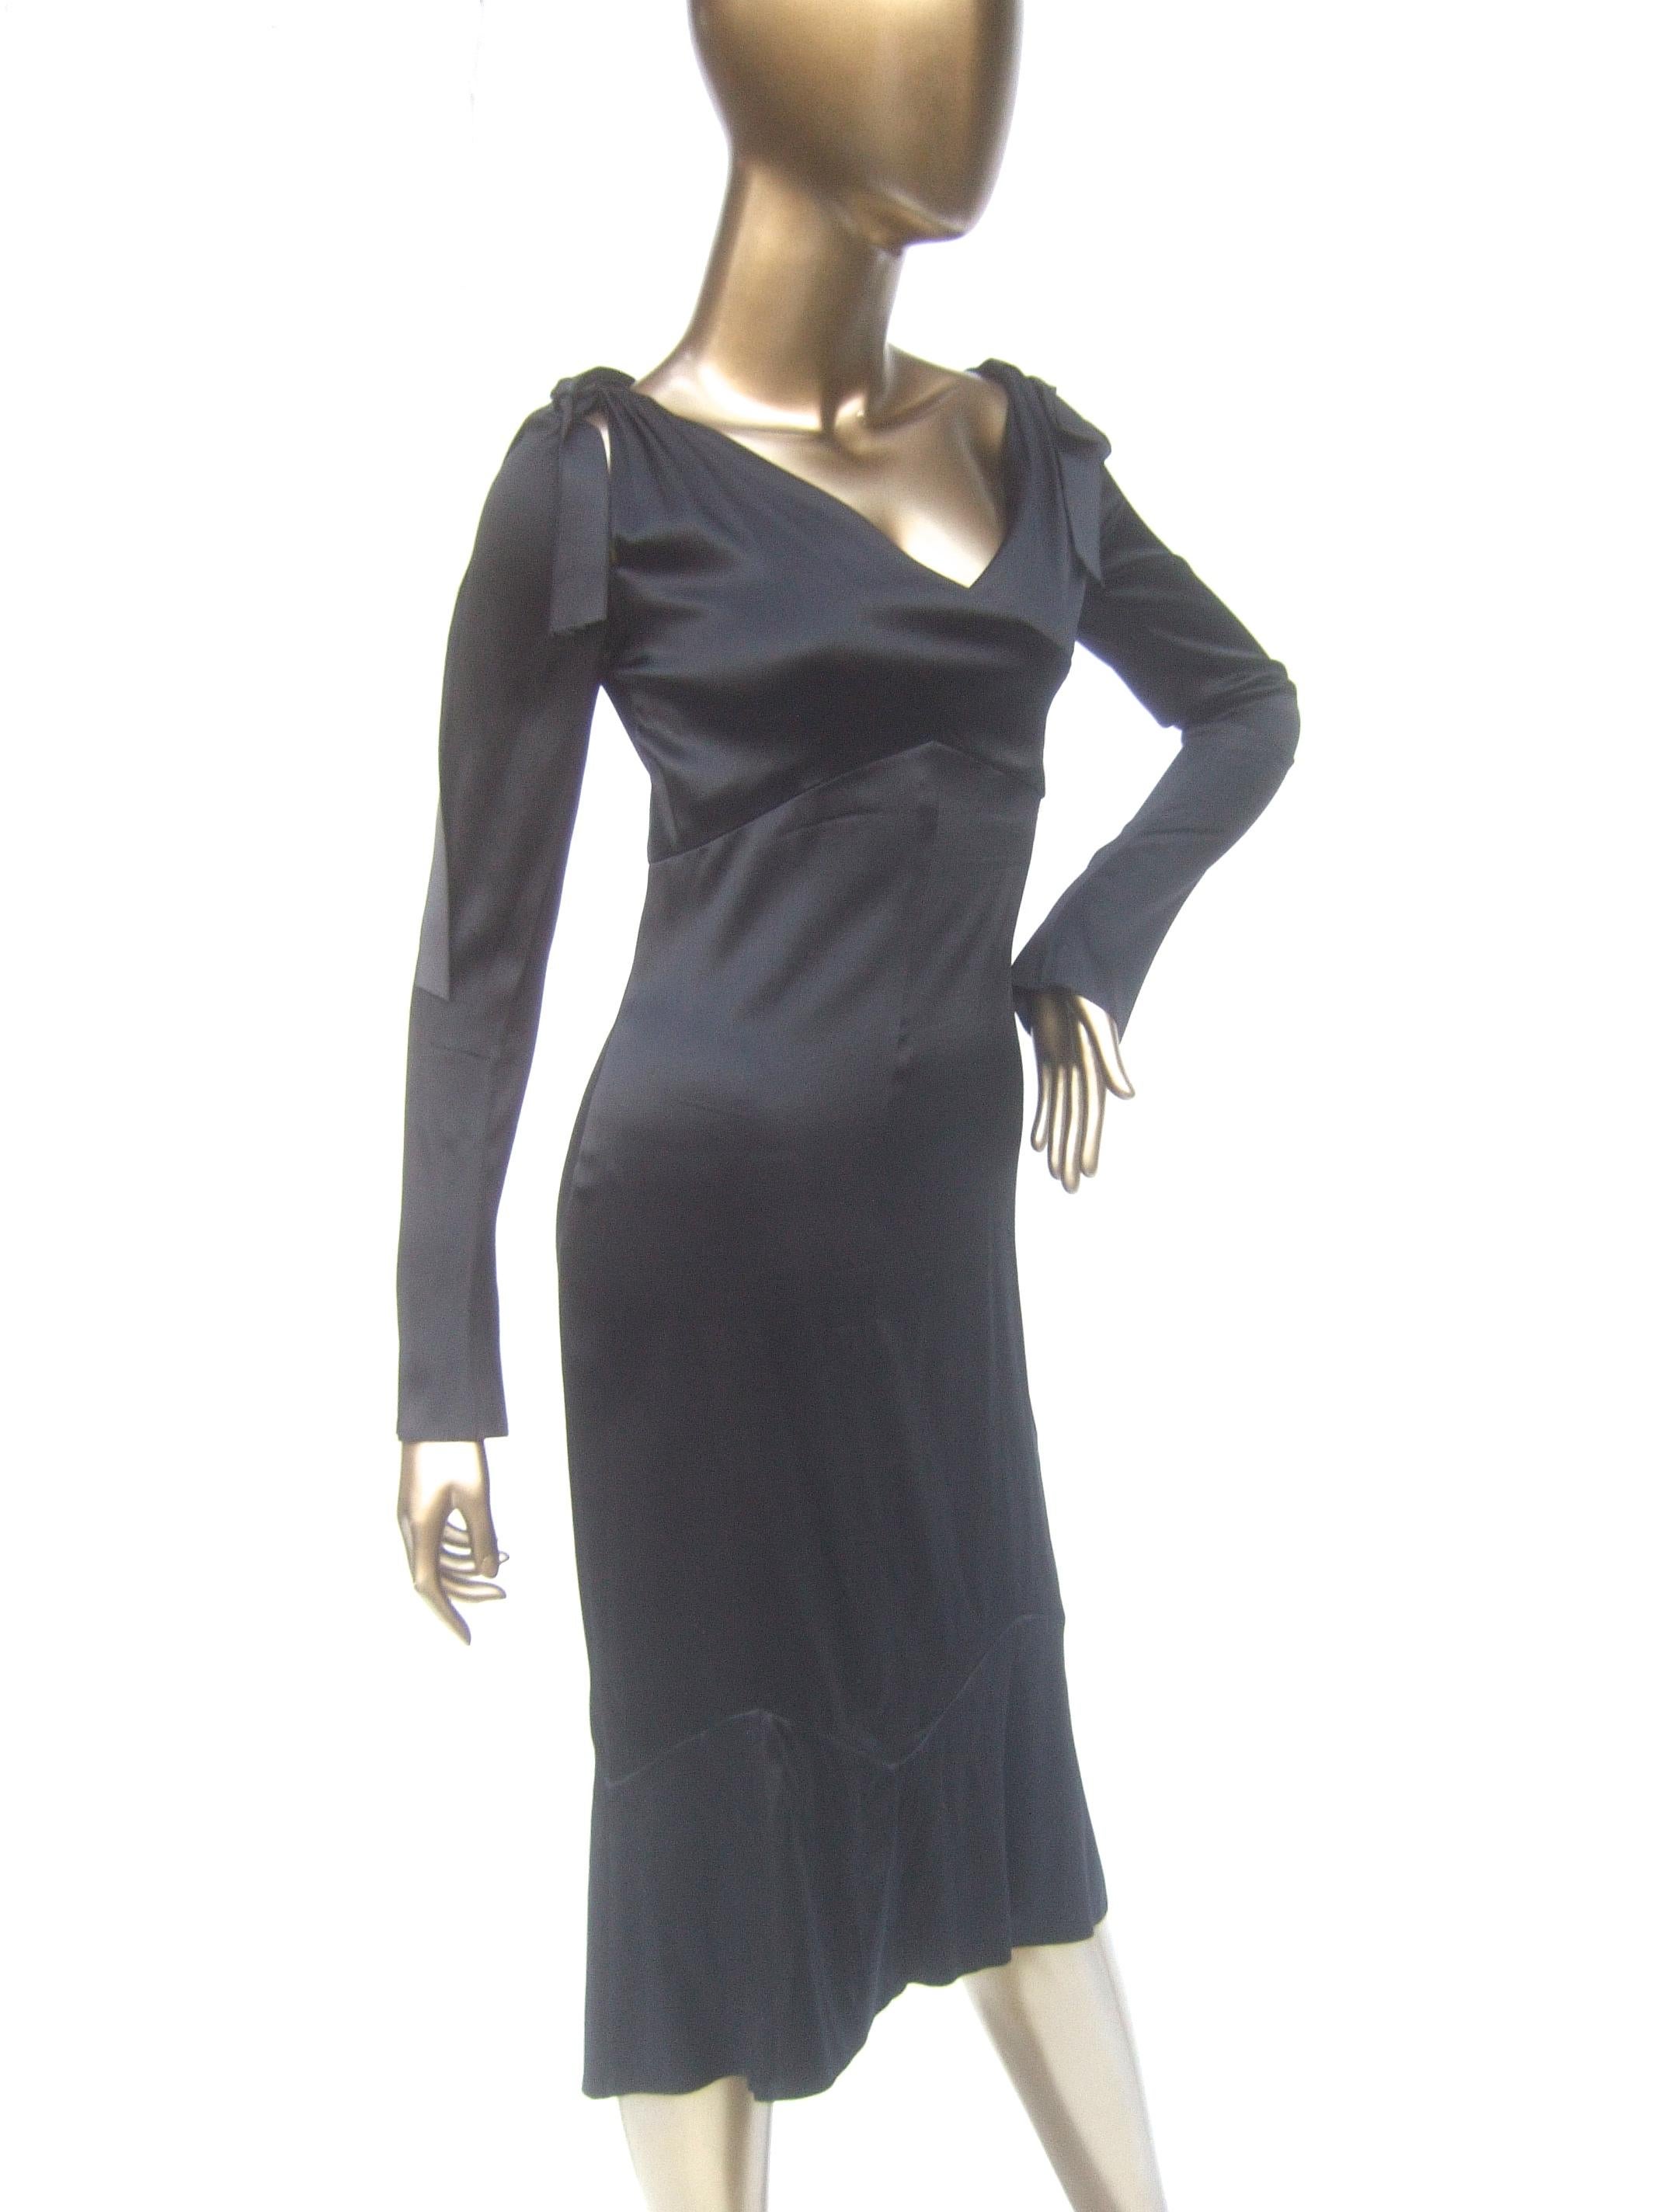 Chanel Silk charmeuse ribbon trim cocktail dress c 1990s Size 34 
The elegant Chanel black silk evening dress is designed 
with slit detail on both shoulders accented with black ribbons

The lower hemline area is designed with a subtle geometric